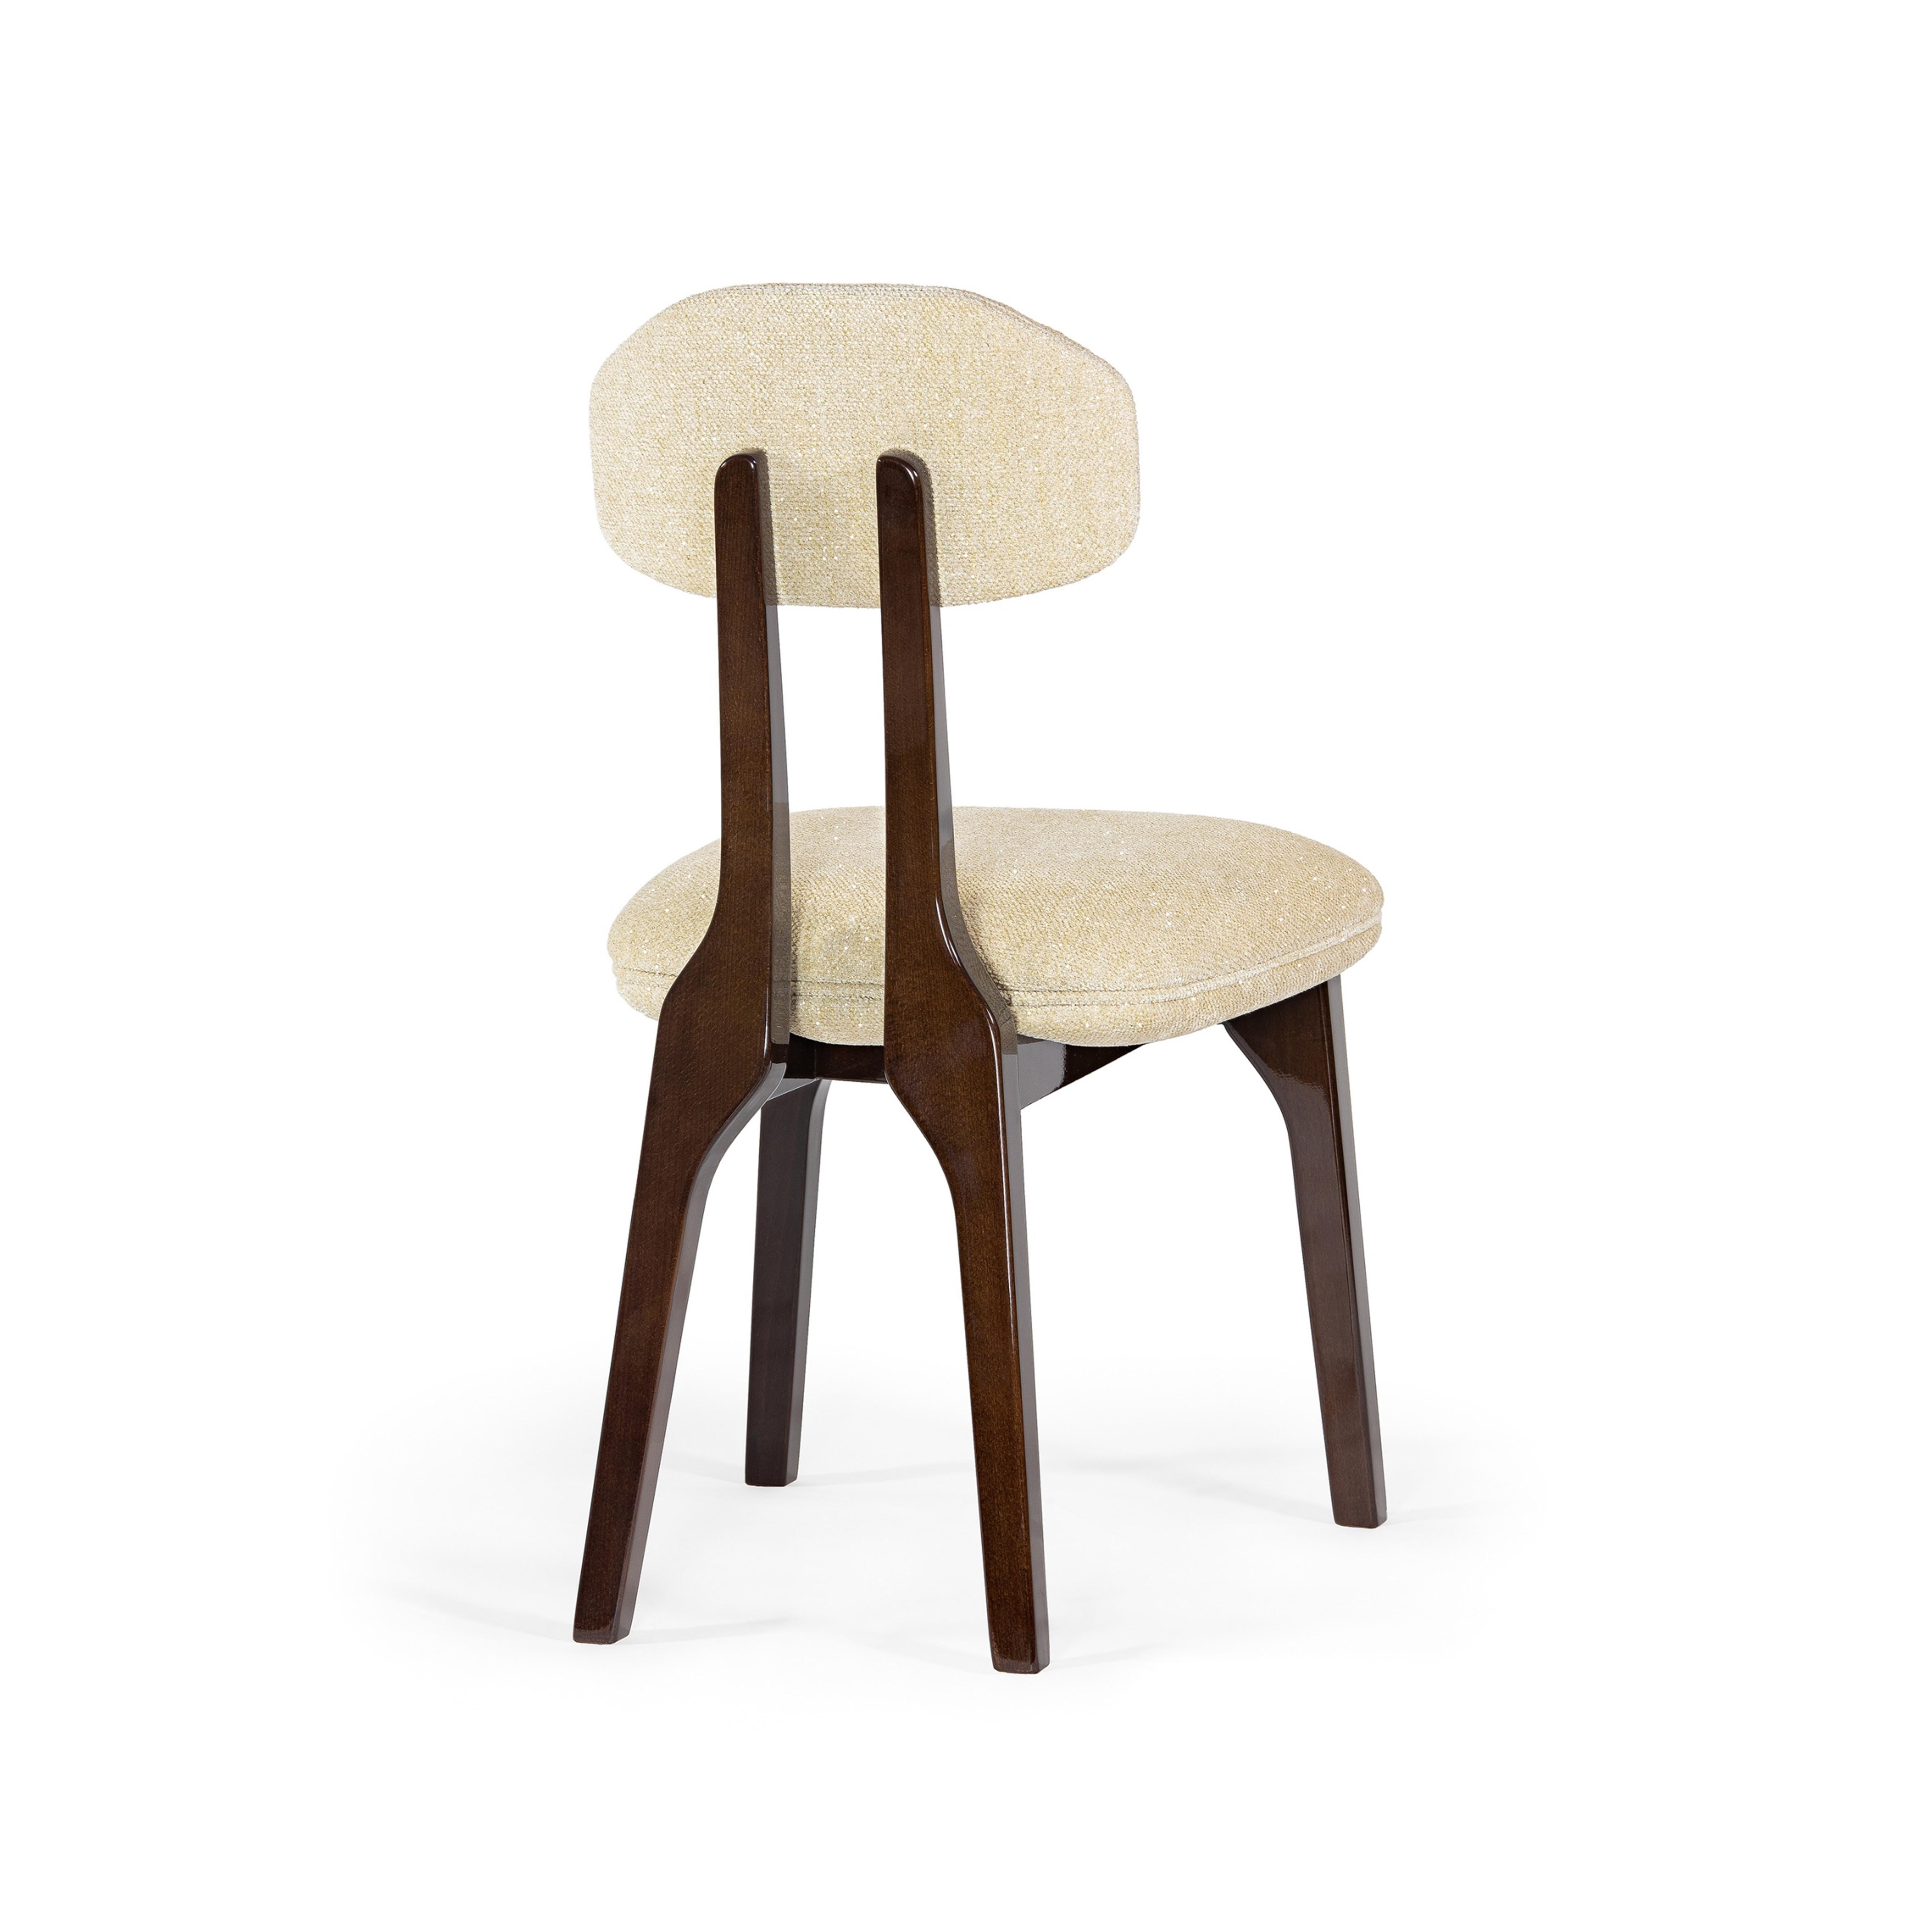 Portuguese Silhouette Dining Chair, Wood & COM, Insidherland by Joana Santos Barbosa For Sale